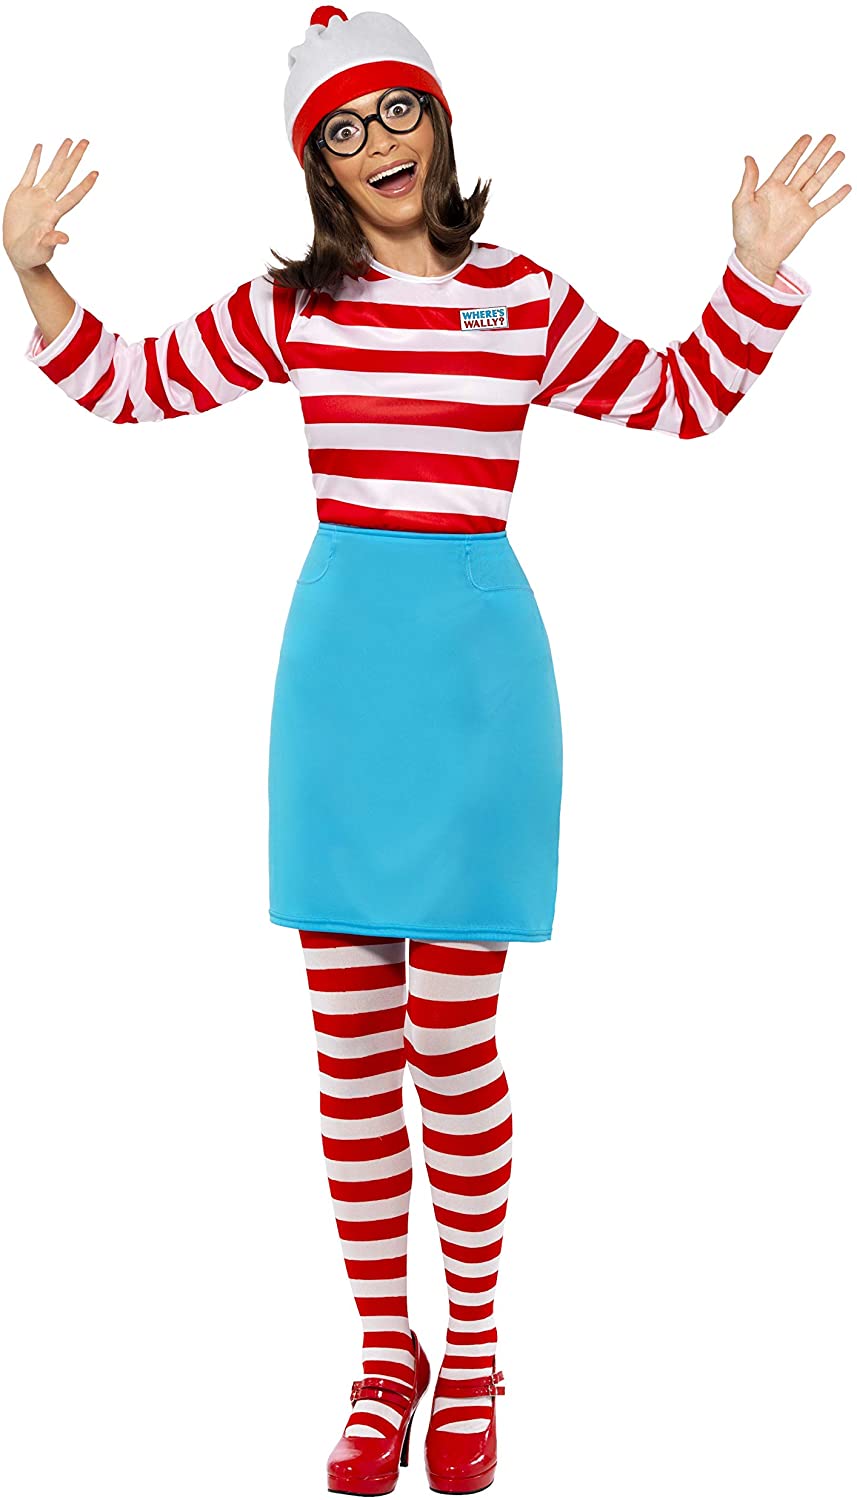 Smiffys Women's Where's Wally? Wenda Costume, Top, Skirt, Glasses, Tights & Hat, Size: M, Colour: Red and White, 39504